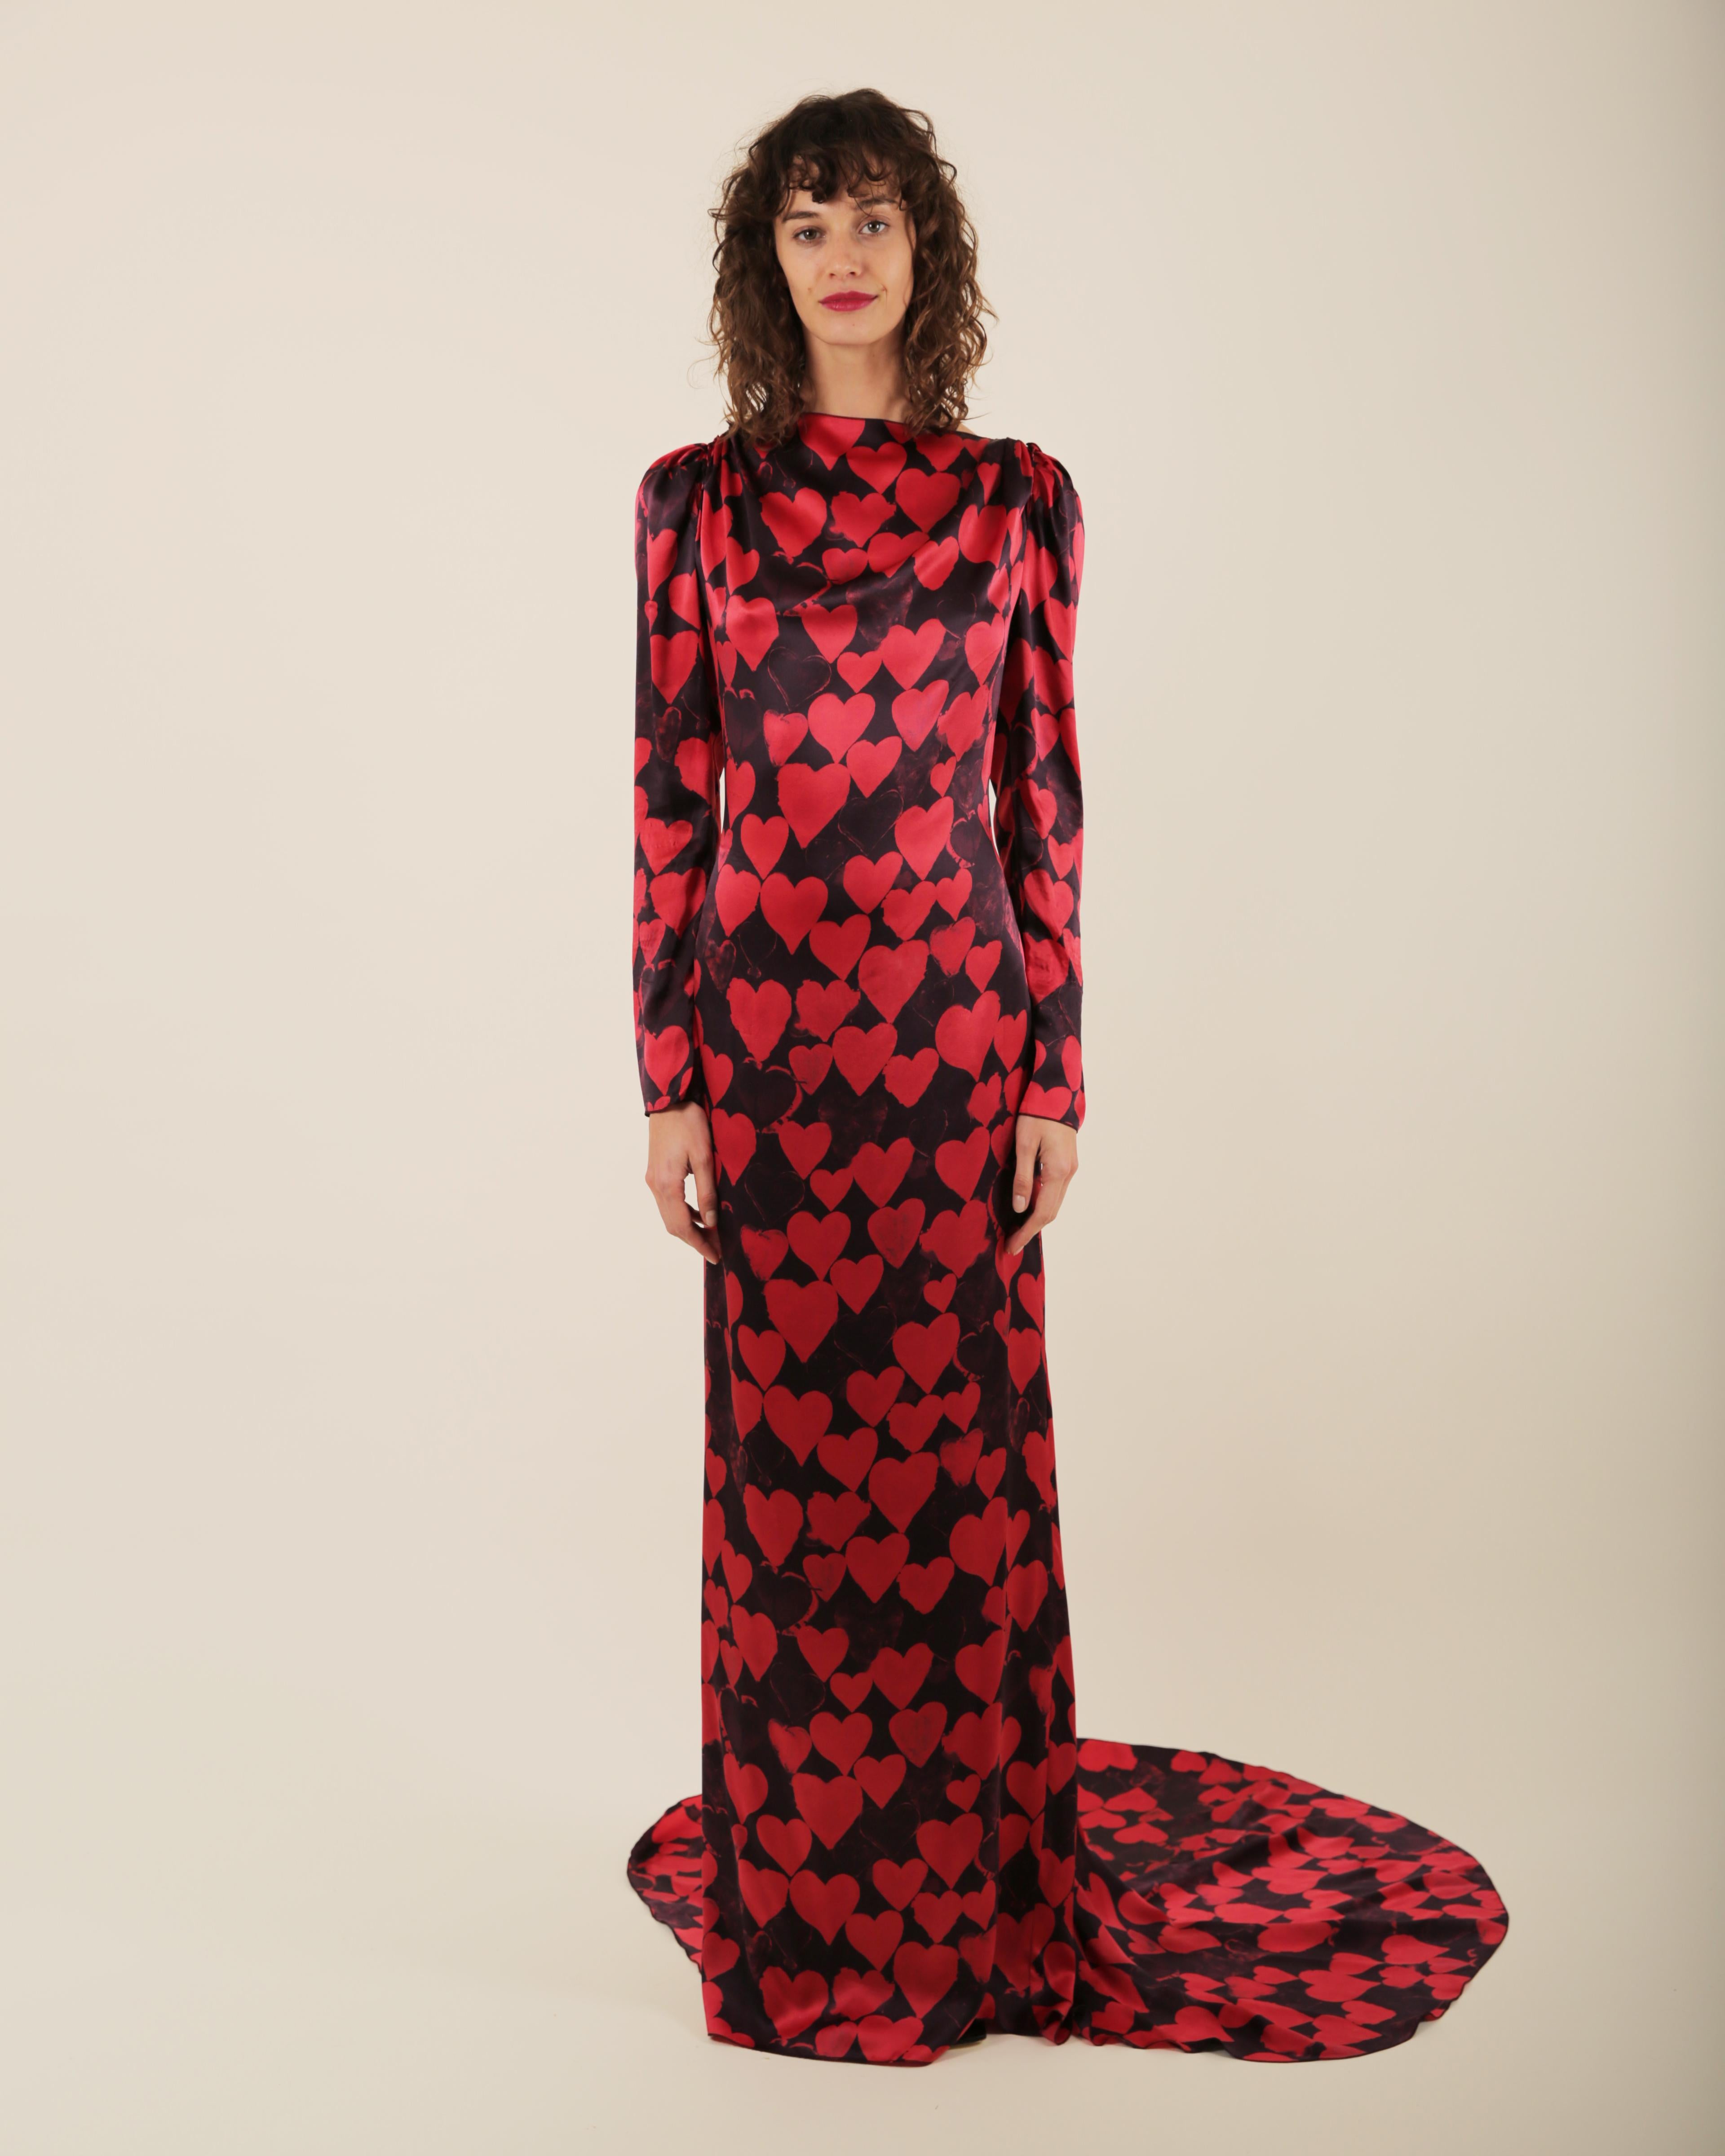 LOVE LALI Vintage

A beautiful floor length silk gown in black, covered in red heart print from Lanvin Pre Fall 2012 which was the 10 year anniversary collection of Alber Elbaz
Long sleeves
Low V cut back with a zip that is concealed by ruffle